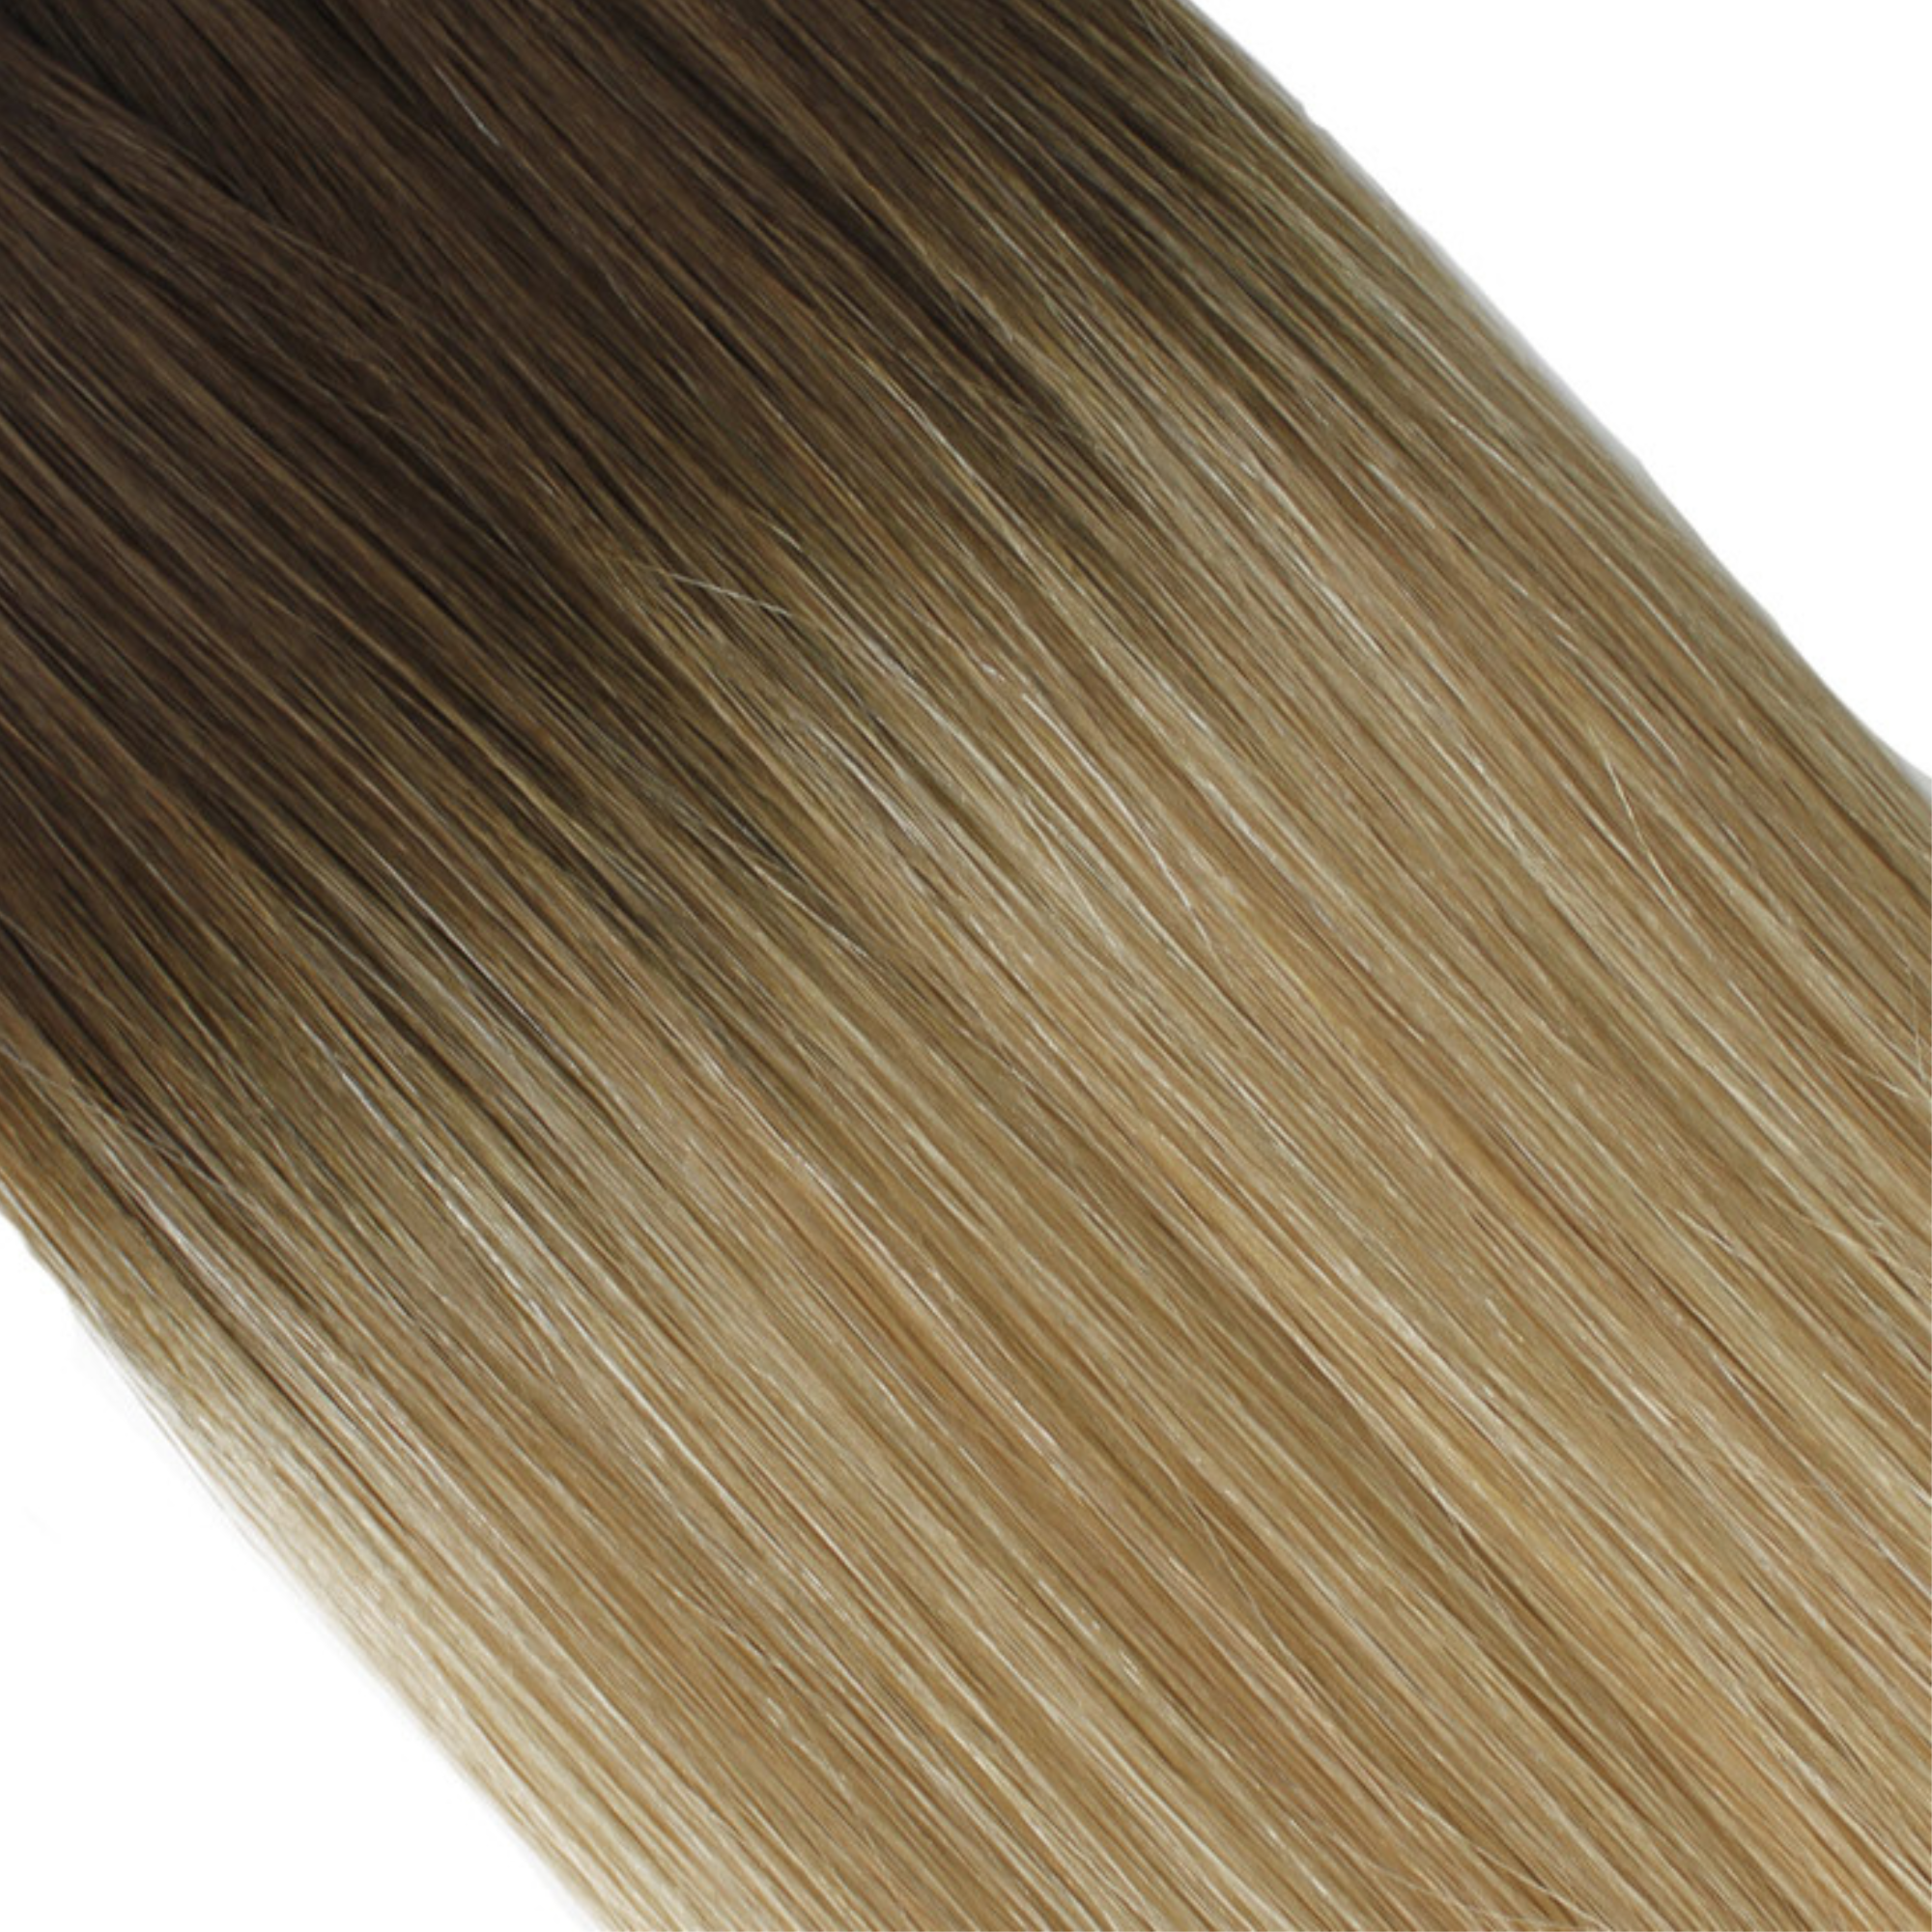 "hair rehab london 22" weft hair extensions shade swatch titled rooted coachella"